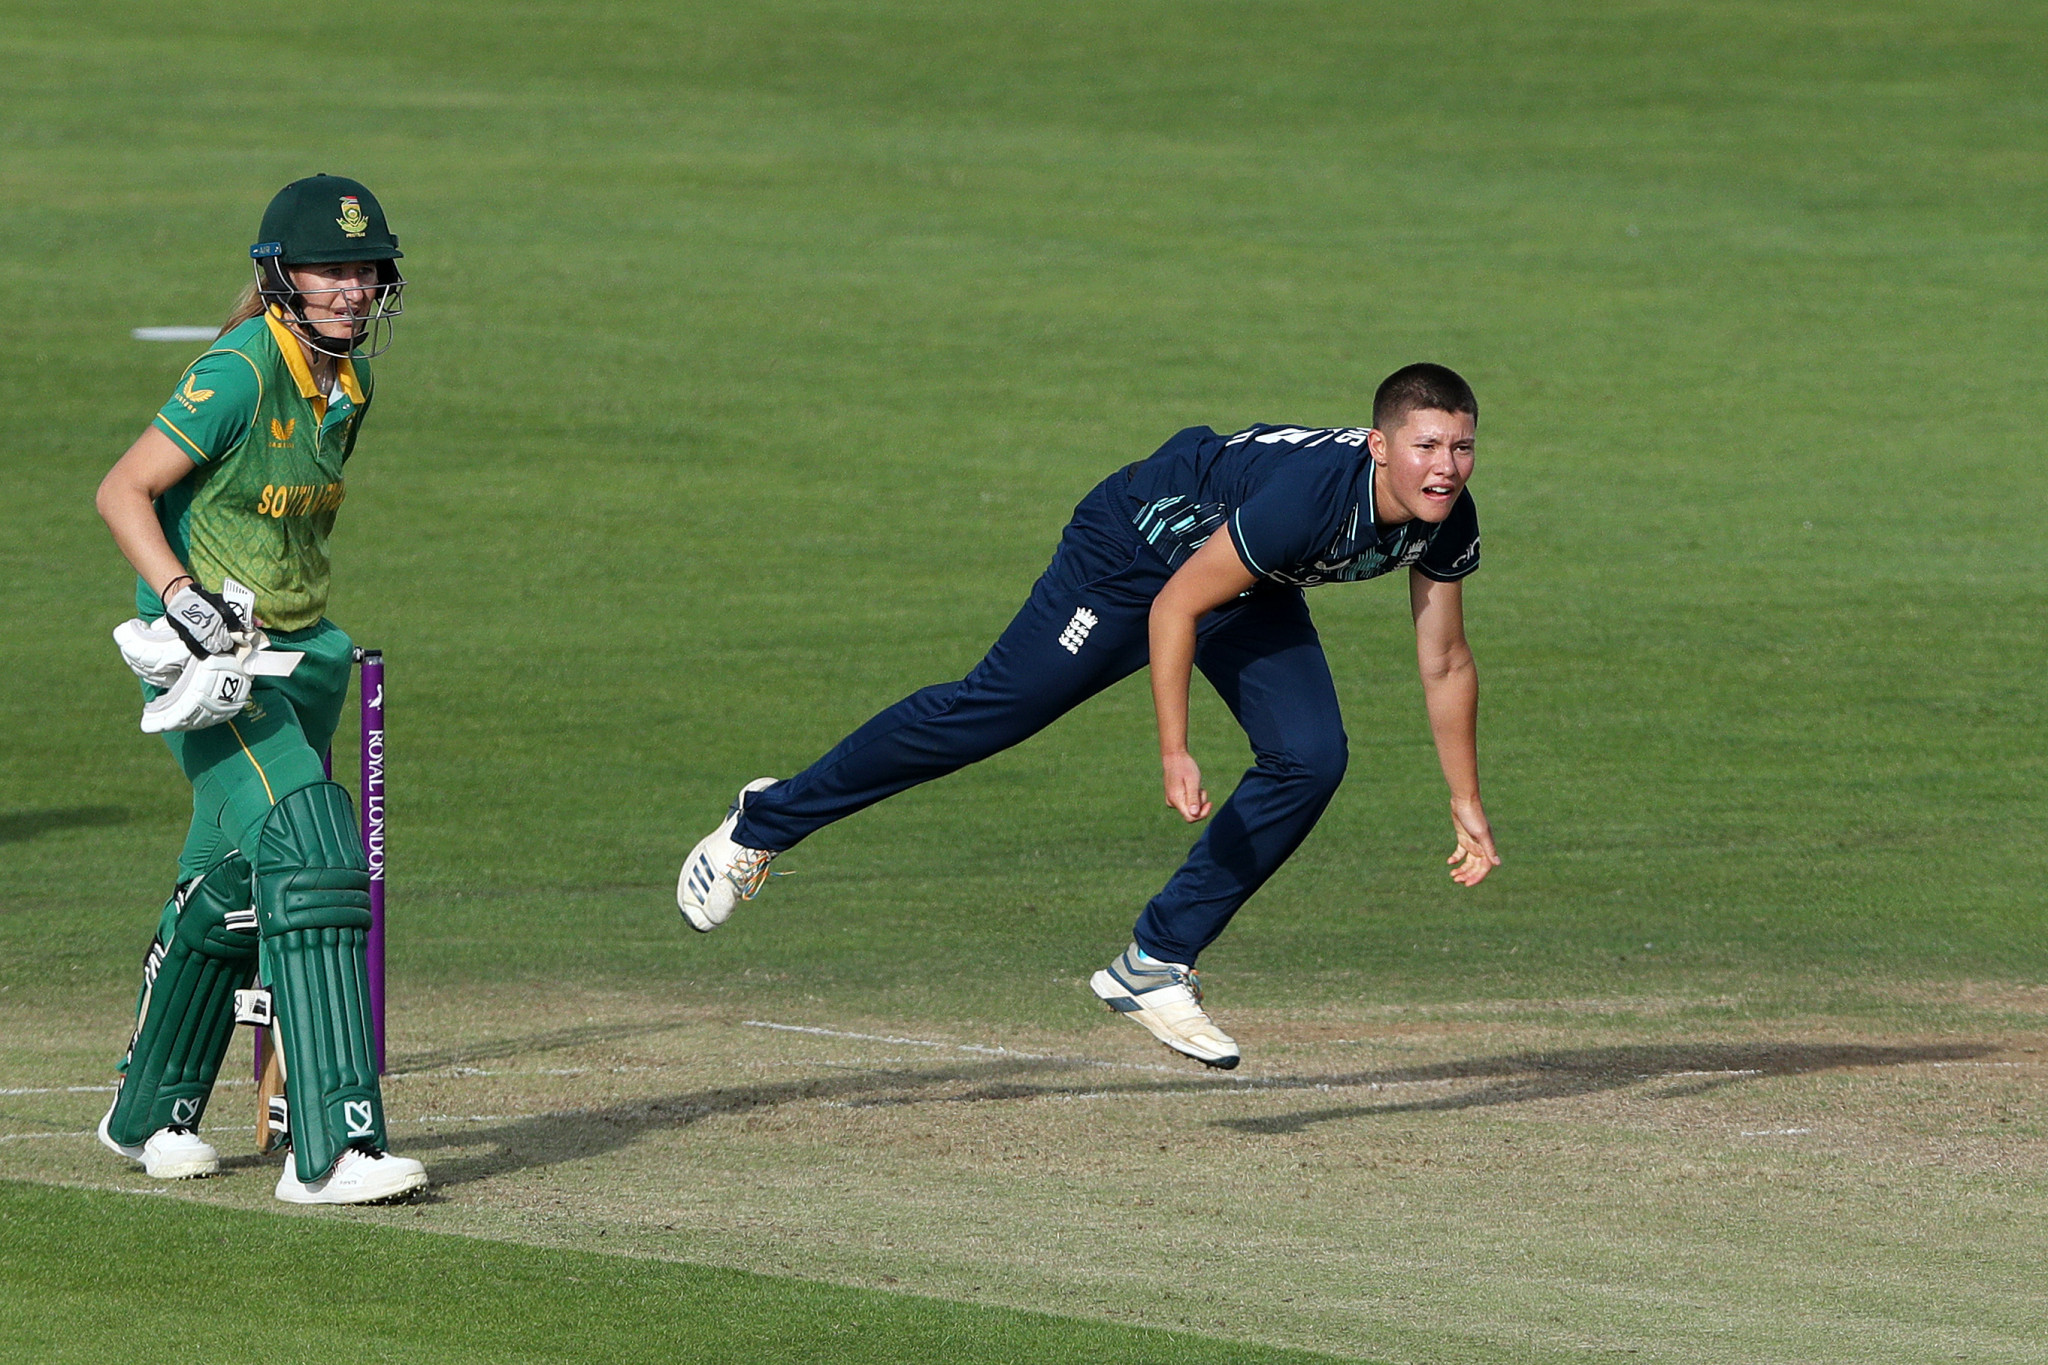 England T20 Commonwealth Games squad puts faith in youth